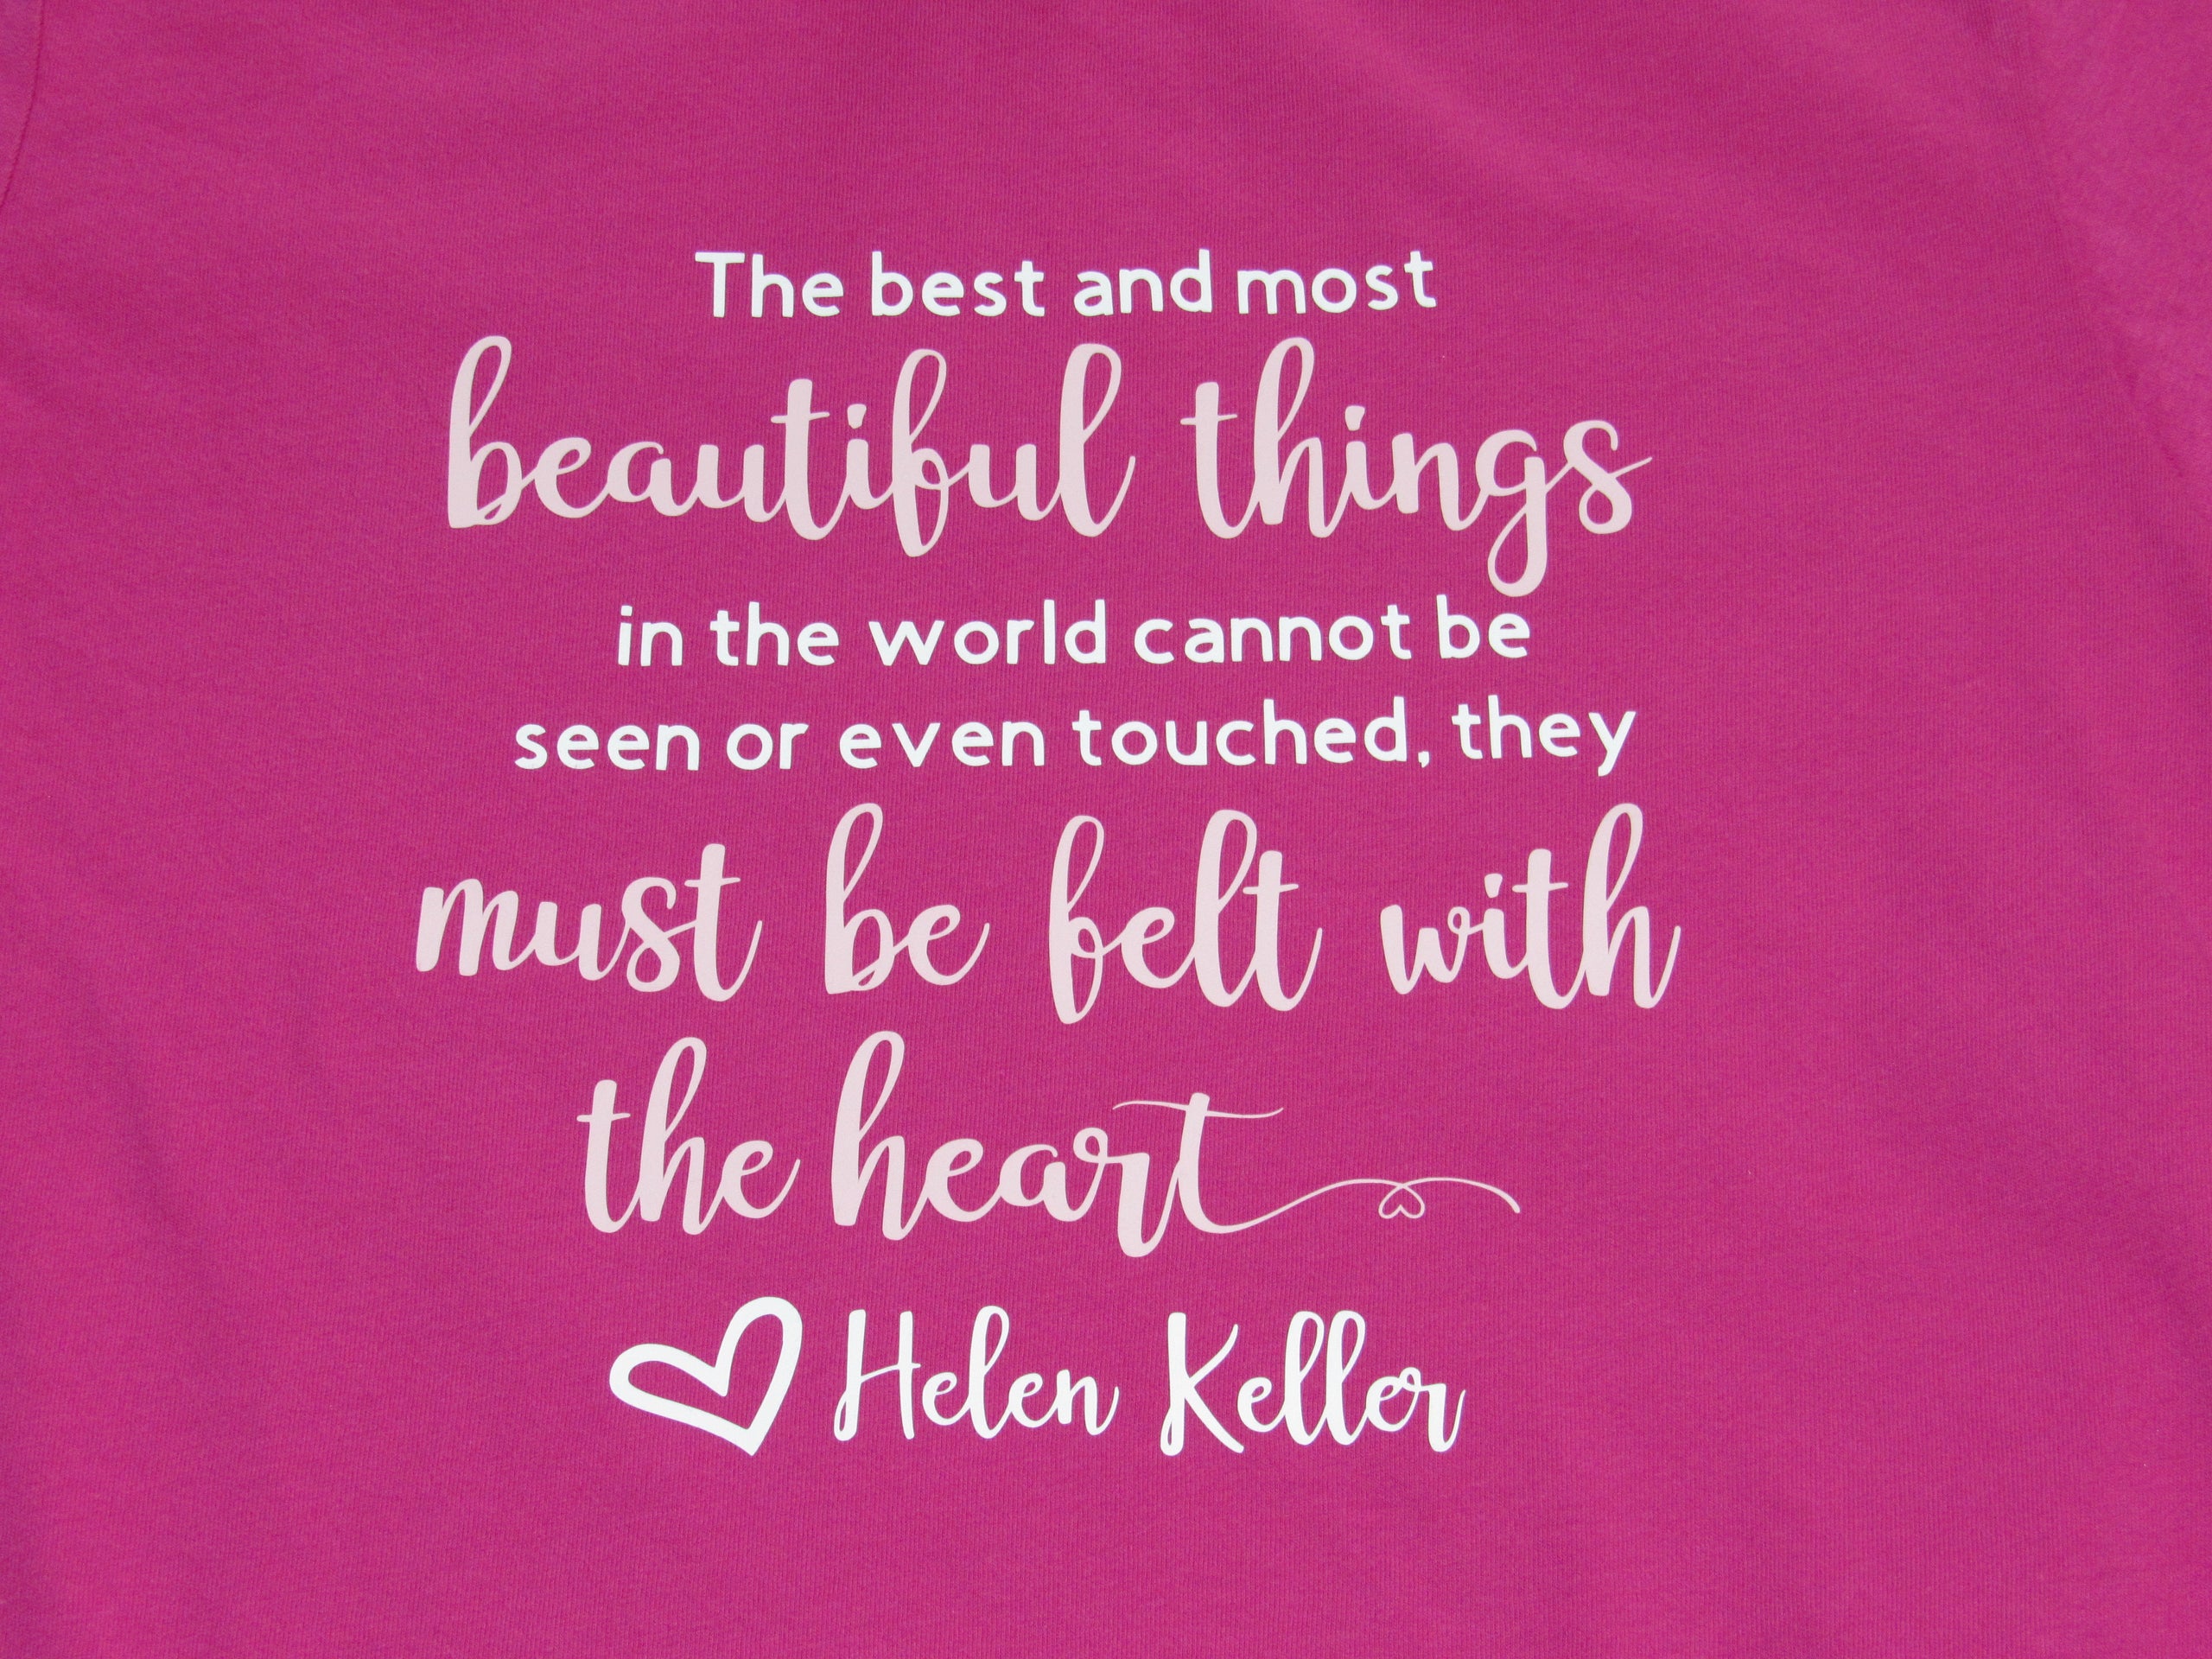 helen keller quotes the best and most beautiful things